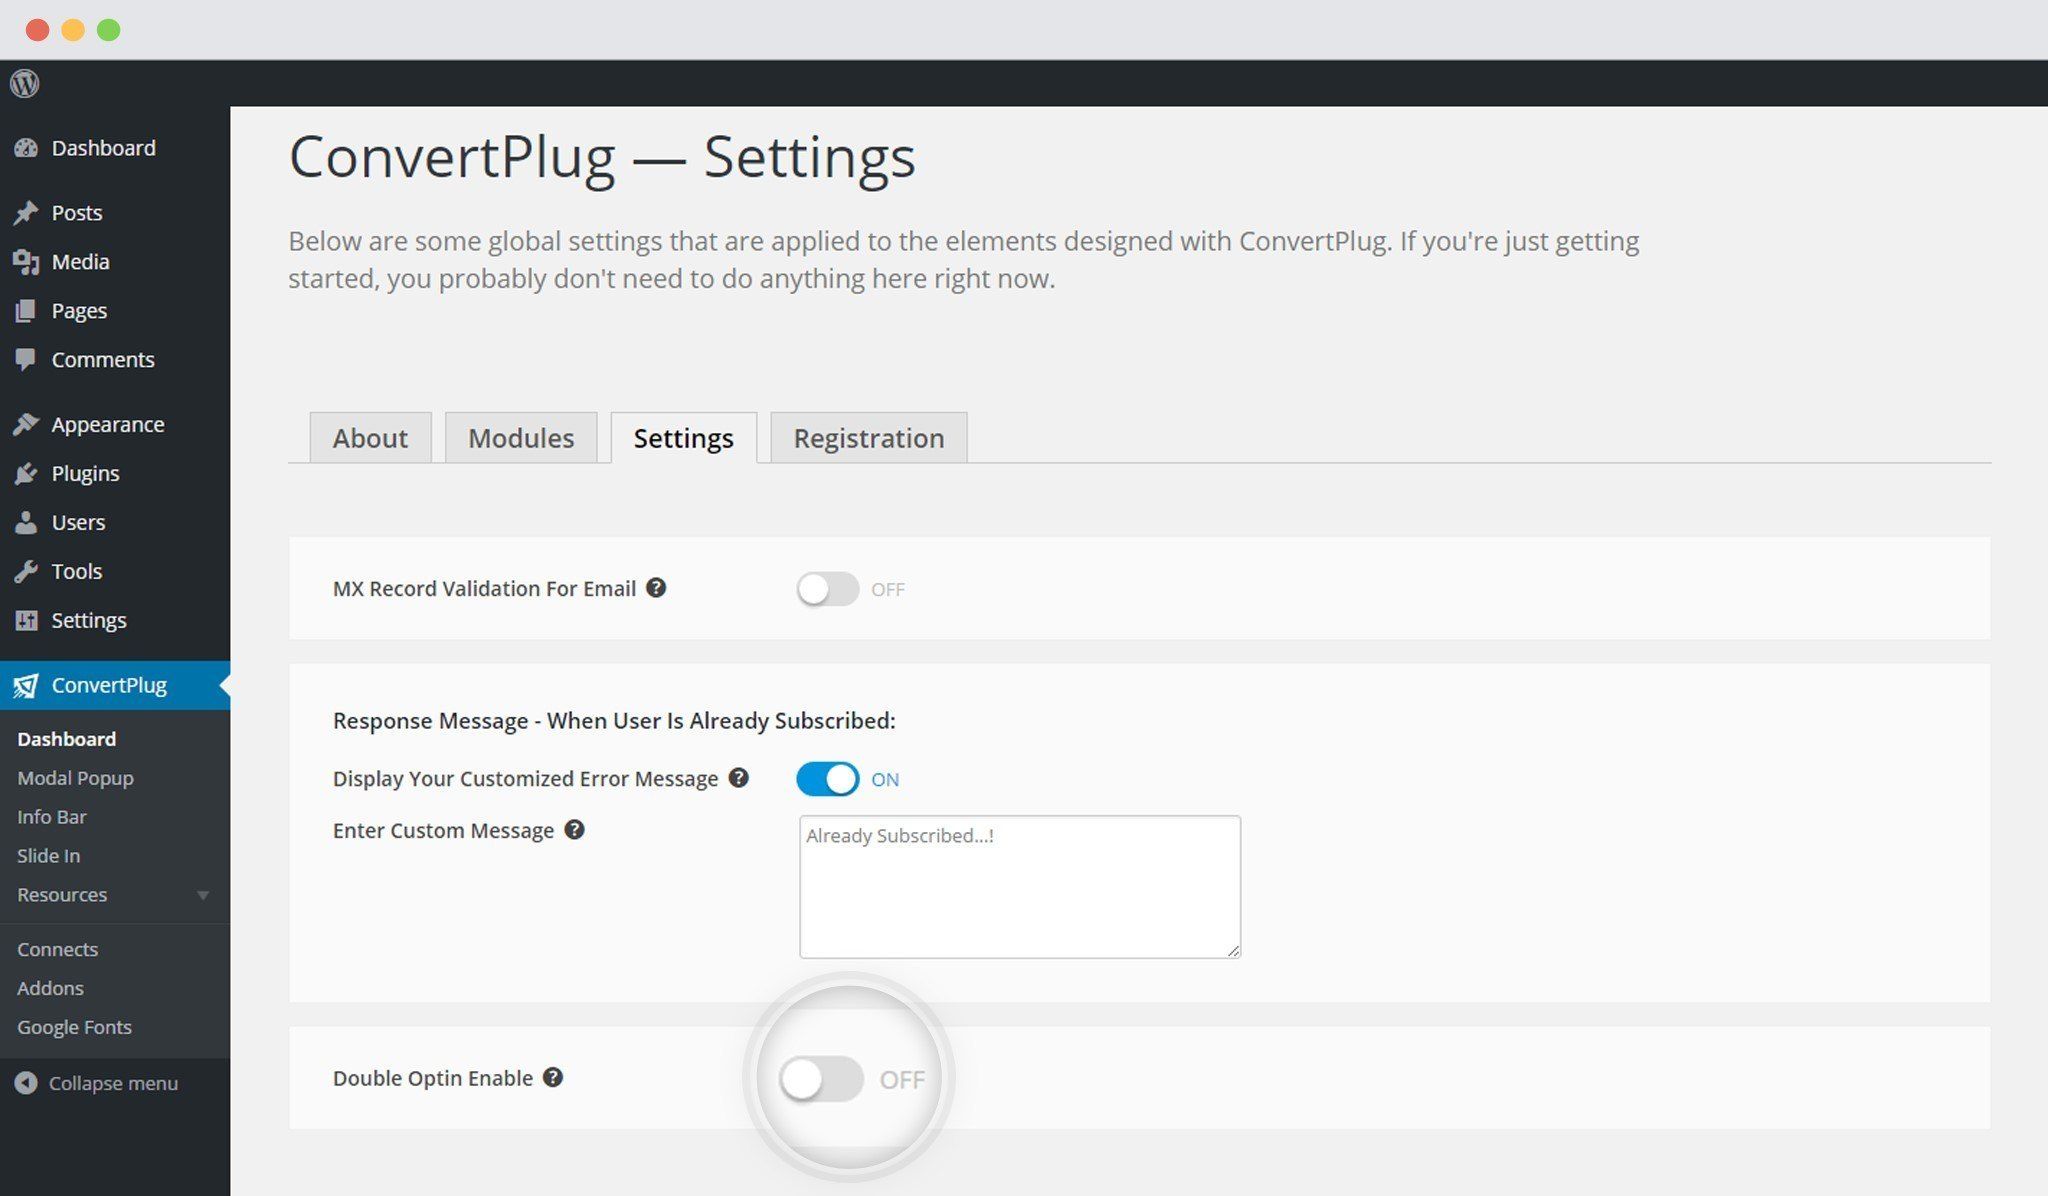 Disable Double Opt-in feature in ConvertPlug